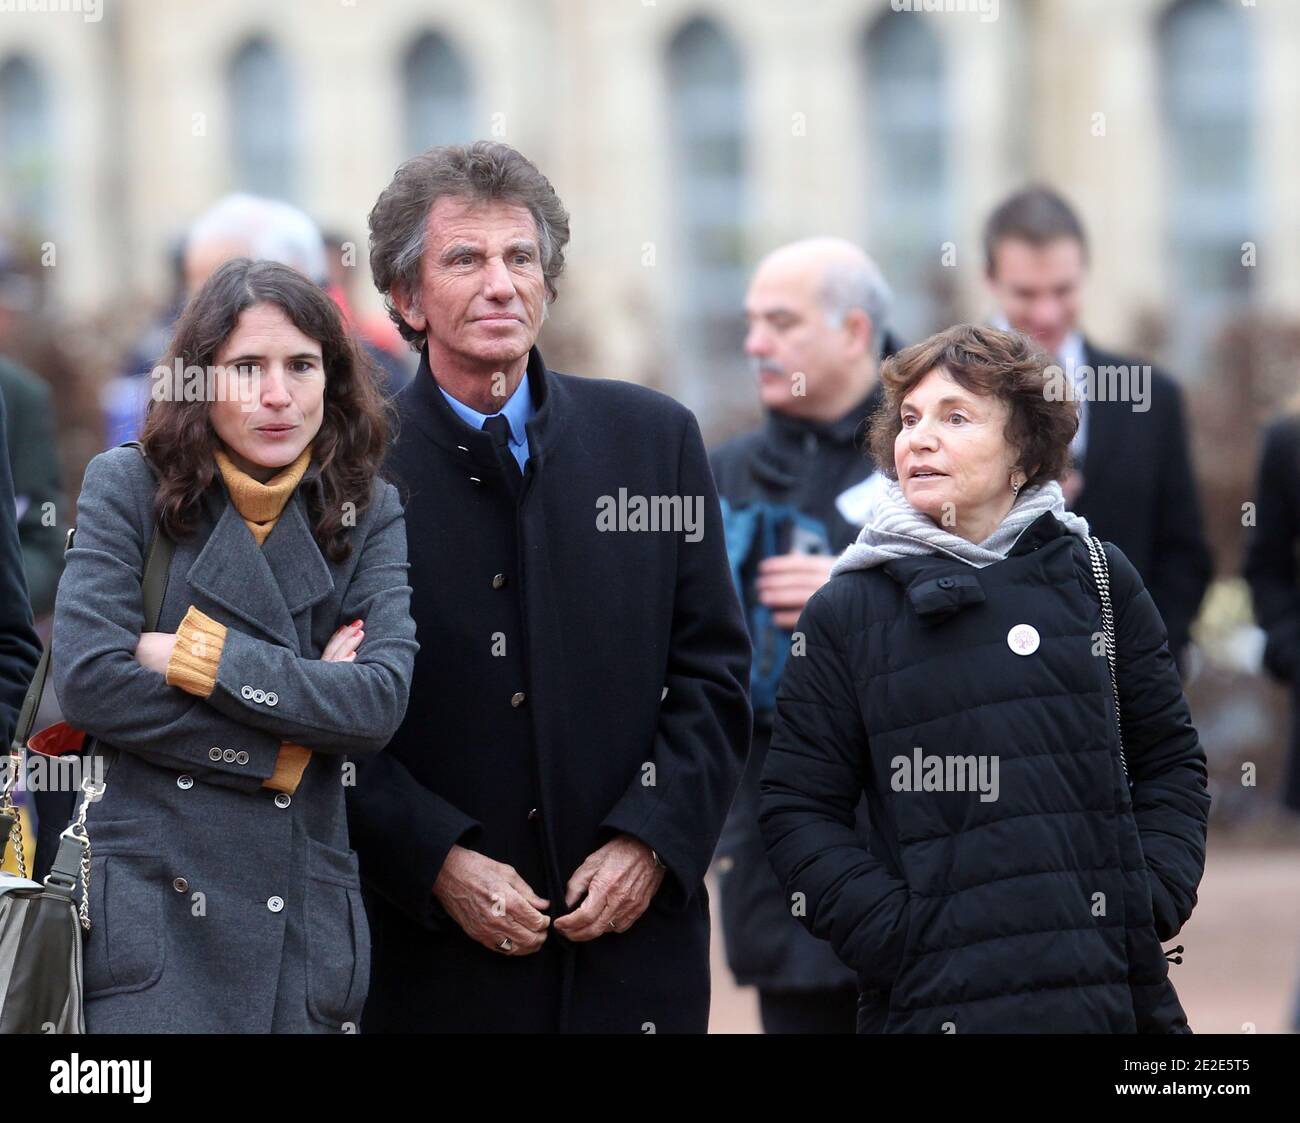 Mazarine Pingeot, Jack Lang and his wife attending the funeral of Danielle Mitterrand on November 26, 2011 in Cluny, France. Danielle Mitterrand, First lady of France between 1981 and 1995 and human rights campaigner died in Paris on November 22, 2011. Photo by Vincent Dargent/ABACAPRESS.COM Stock Photo